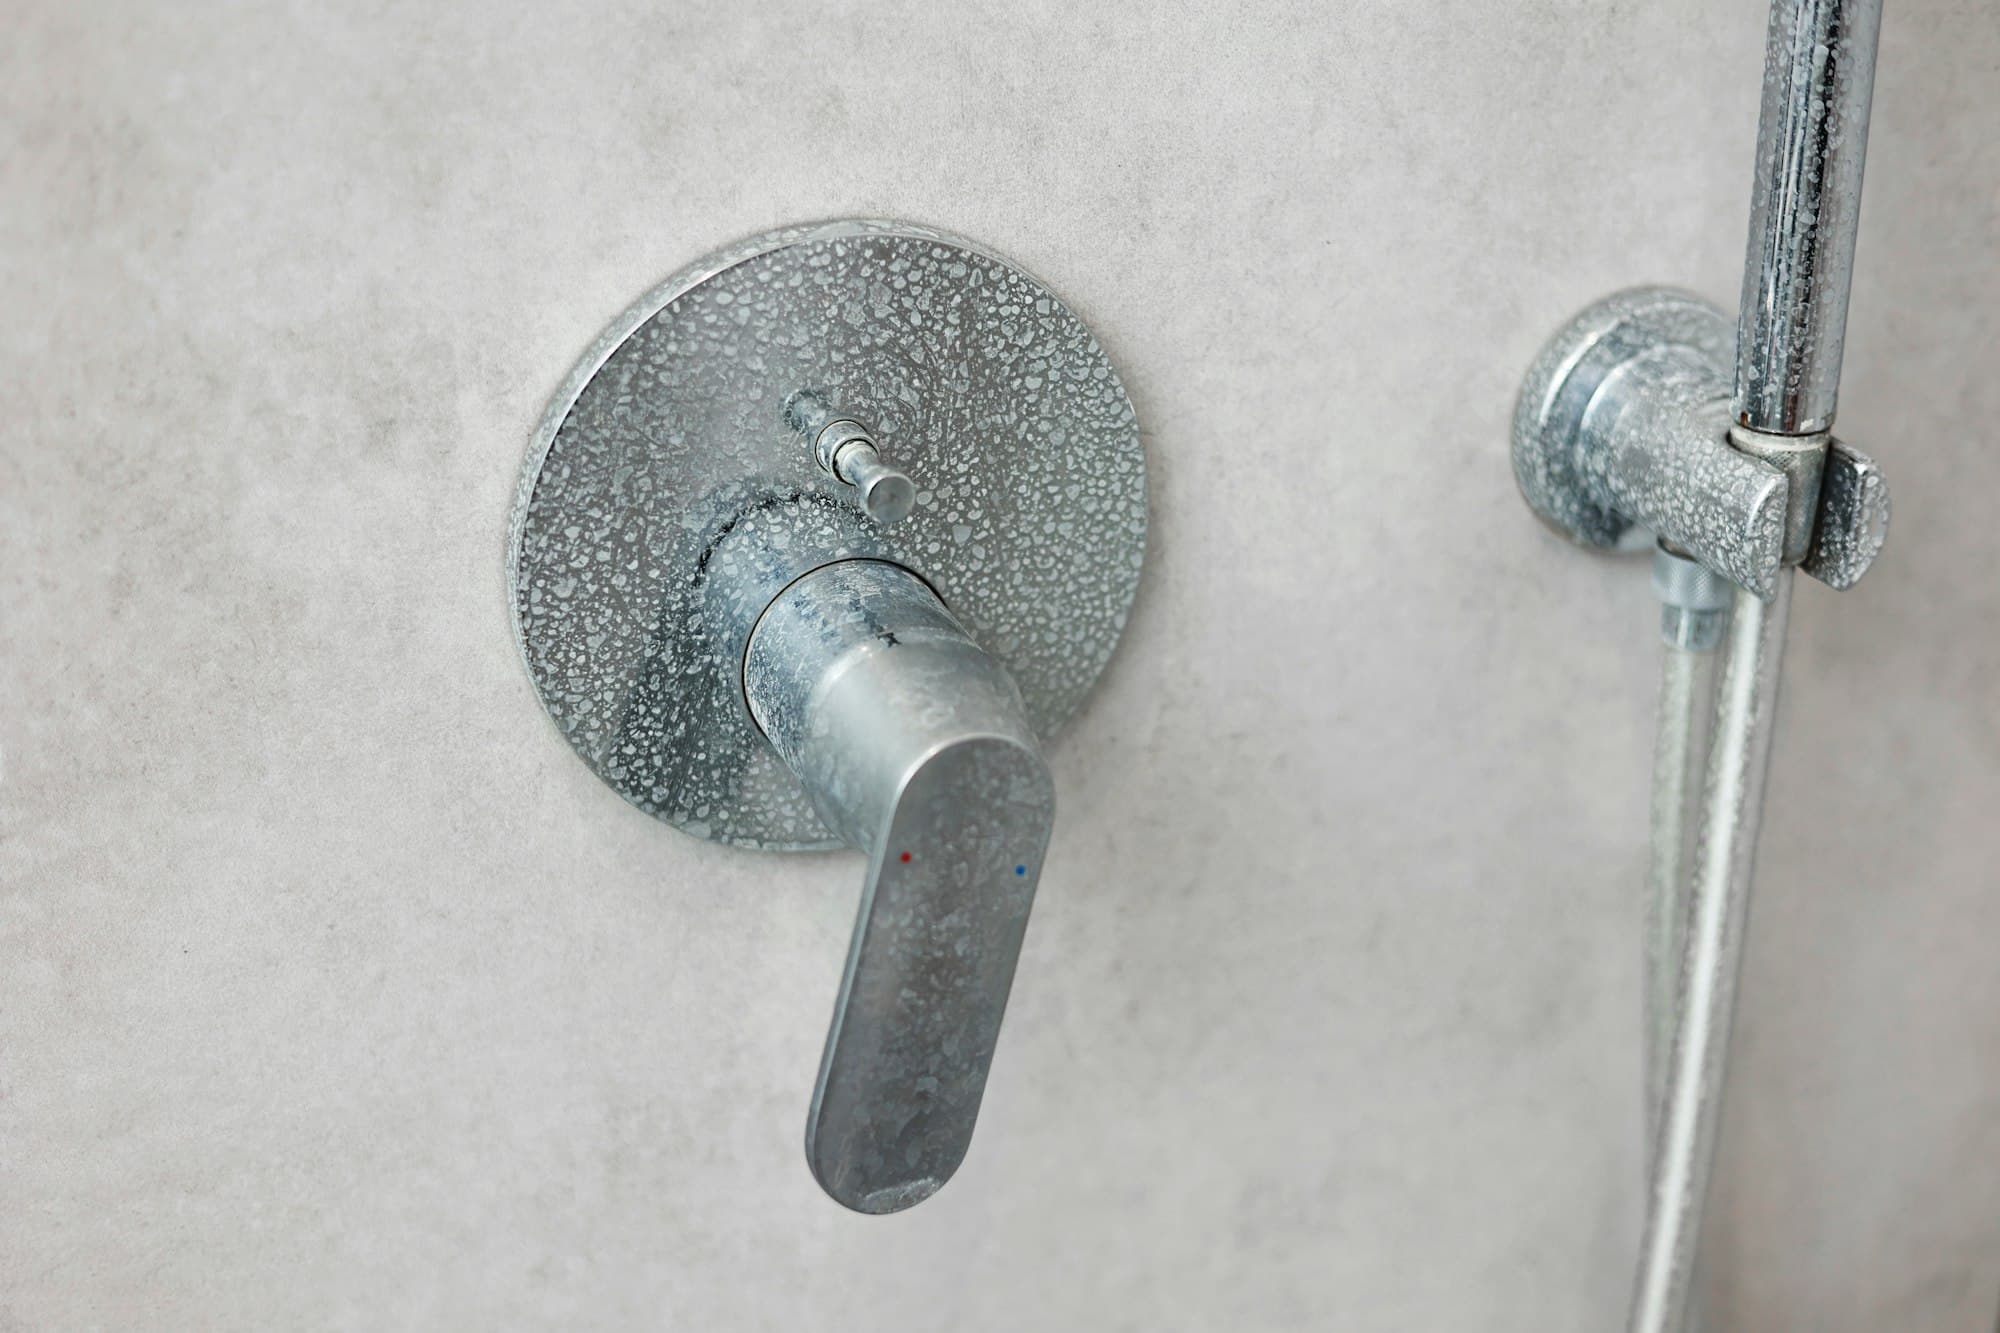 Dirty calcified shower mixer tap, faucet with limescale on it, plaque from hard water, Chrome plate